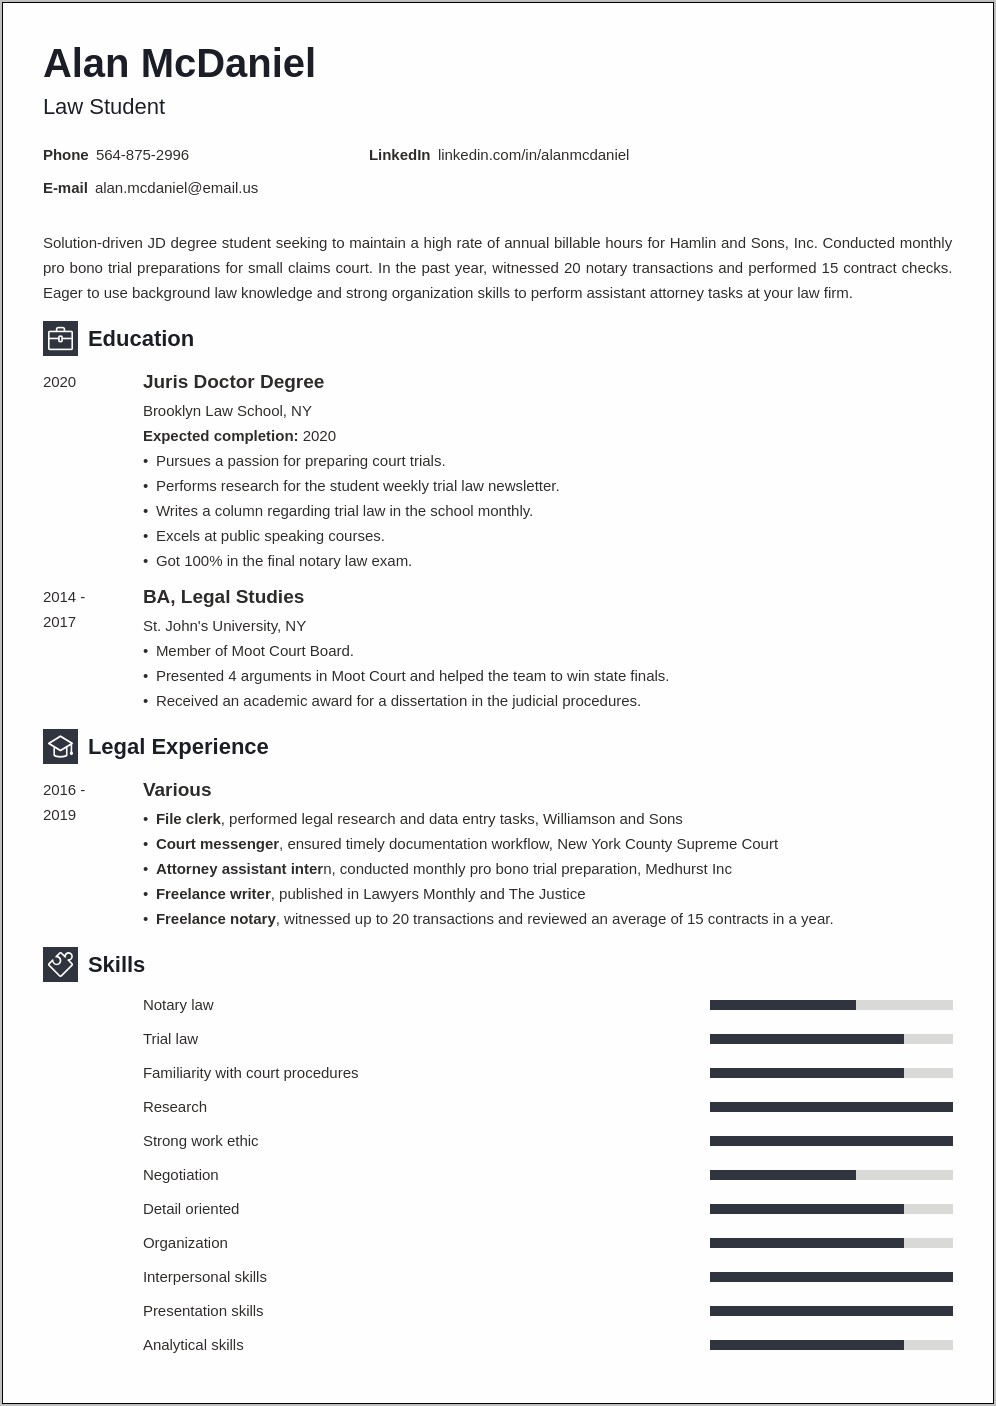 Adding Clinic Experience Law School Resume